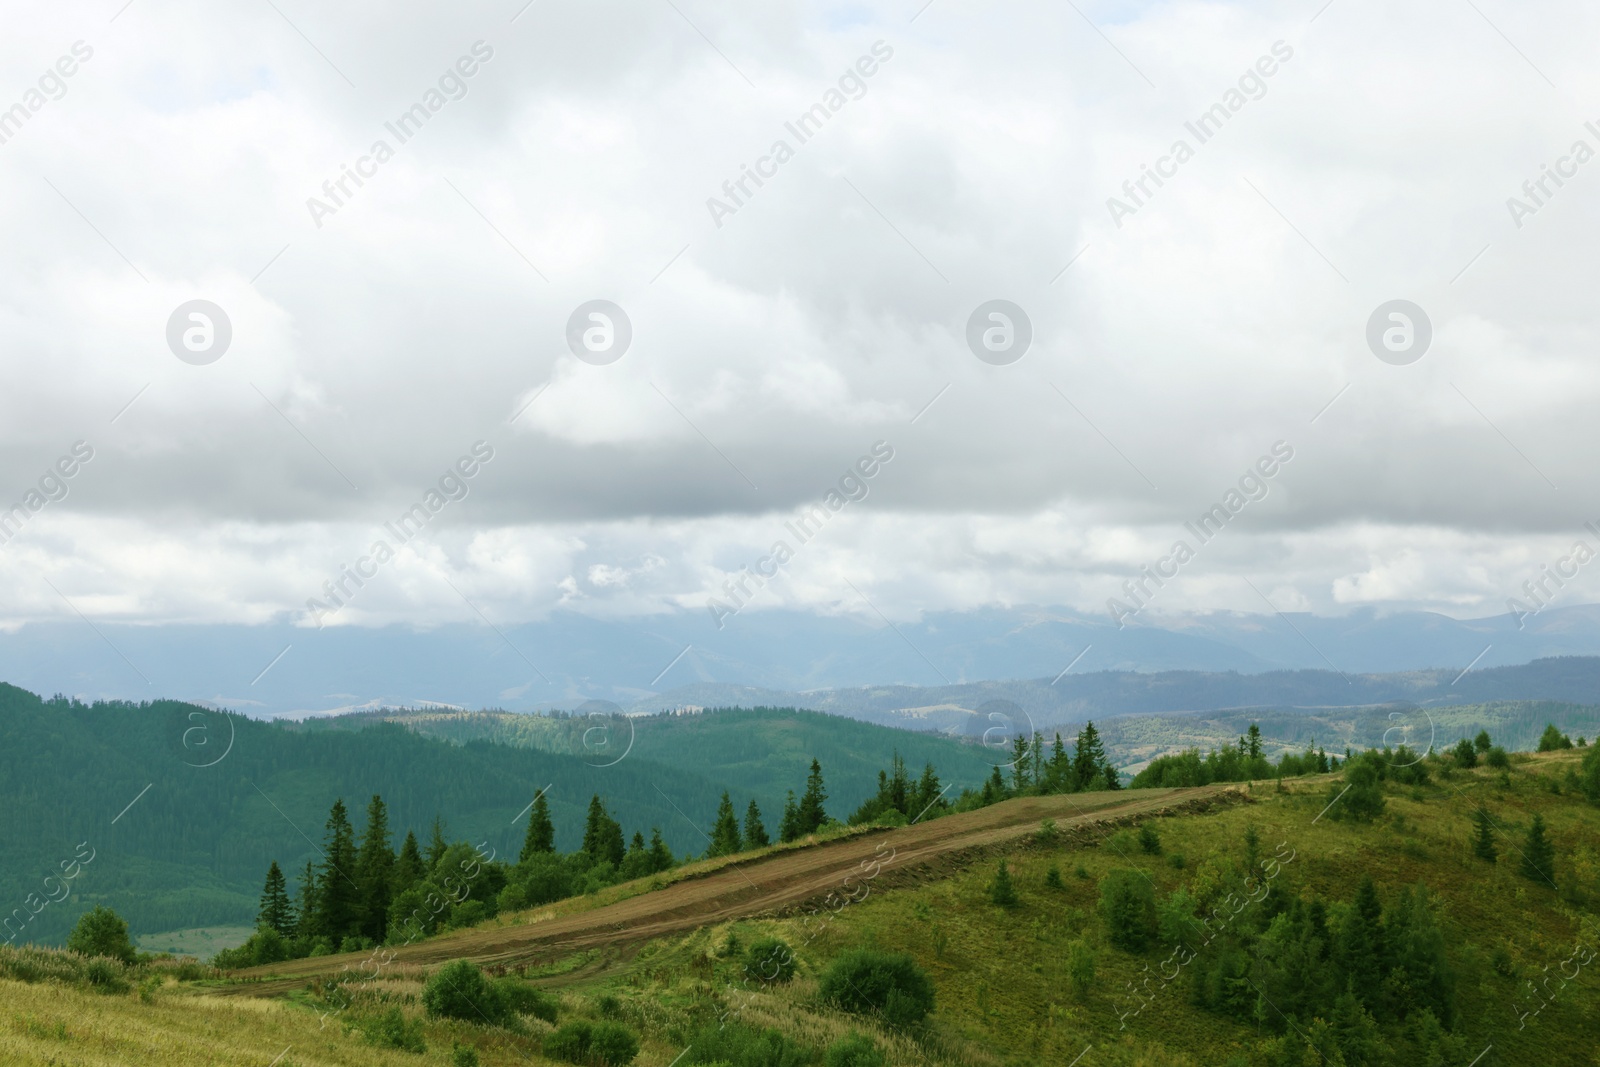 Photo of Picturesque view of mountain landscape and cloudy sky